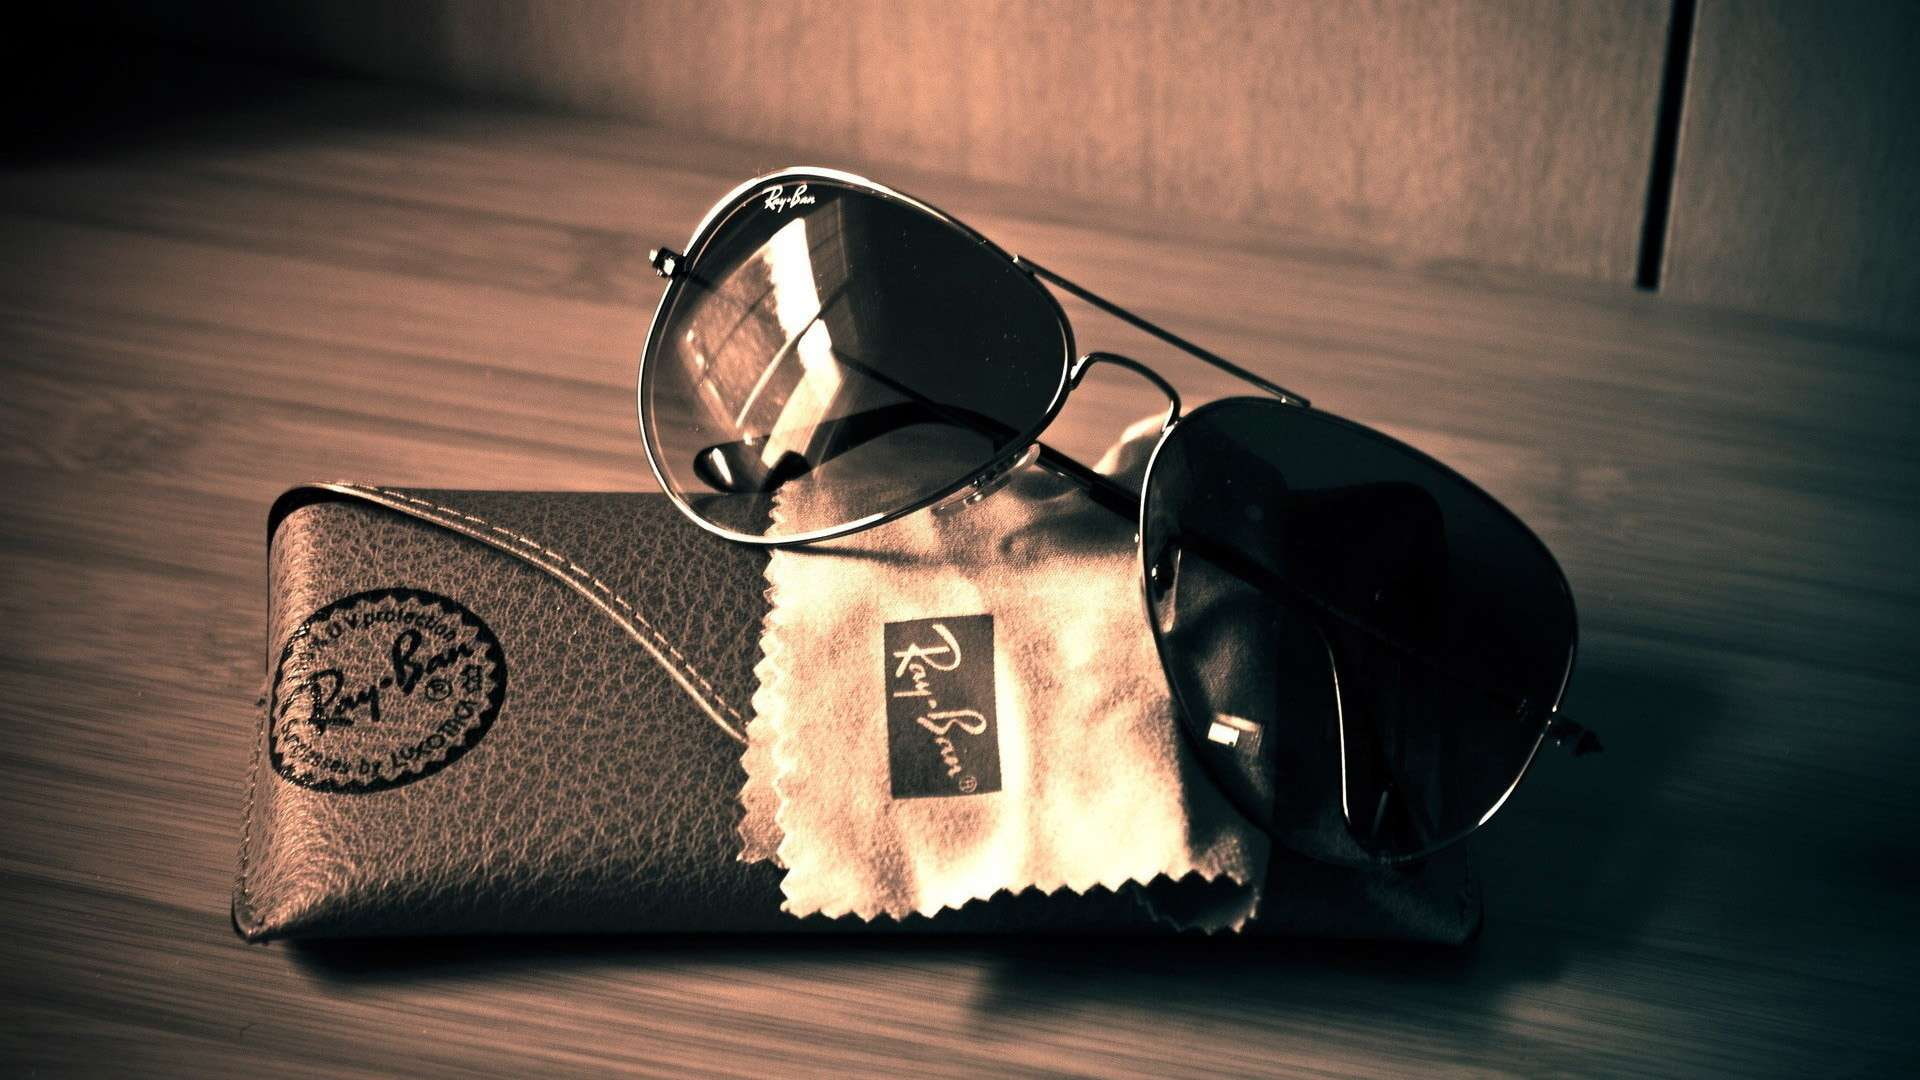 Ray Ban Aviator HD, silver frame black lens rayban aviator with leather pouch